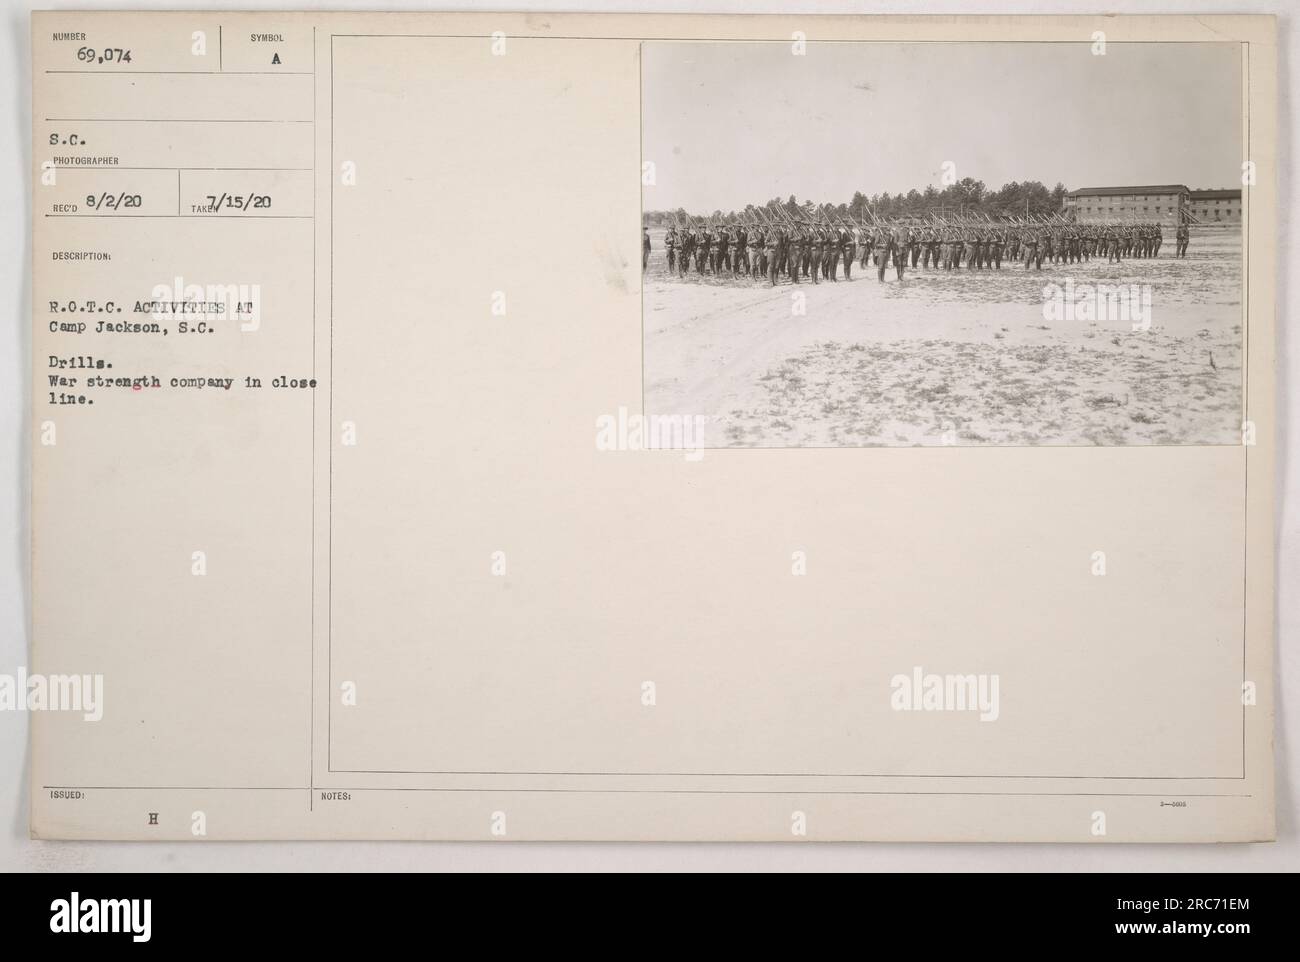 R.O.T.C. students engage in drills at Camp Jackson, South Carolina during World War I. The company is seen lined up in close formation. This particular photograph was taken on August 2, 1920, by an 8.C. photographer. The image is part of a series documenting R.O.T.C. activities at the camp. Stock Photo